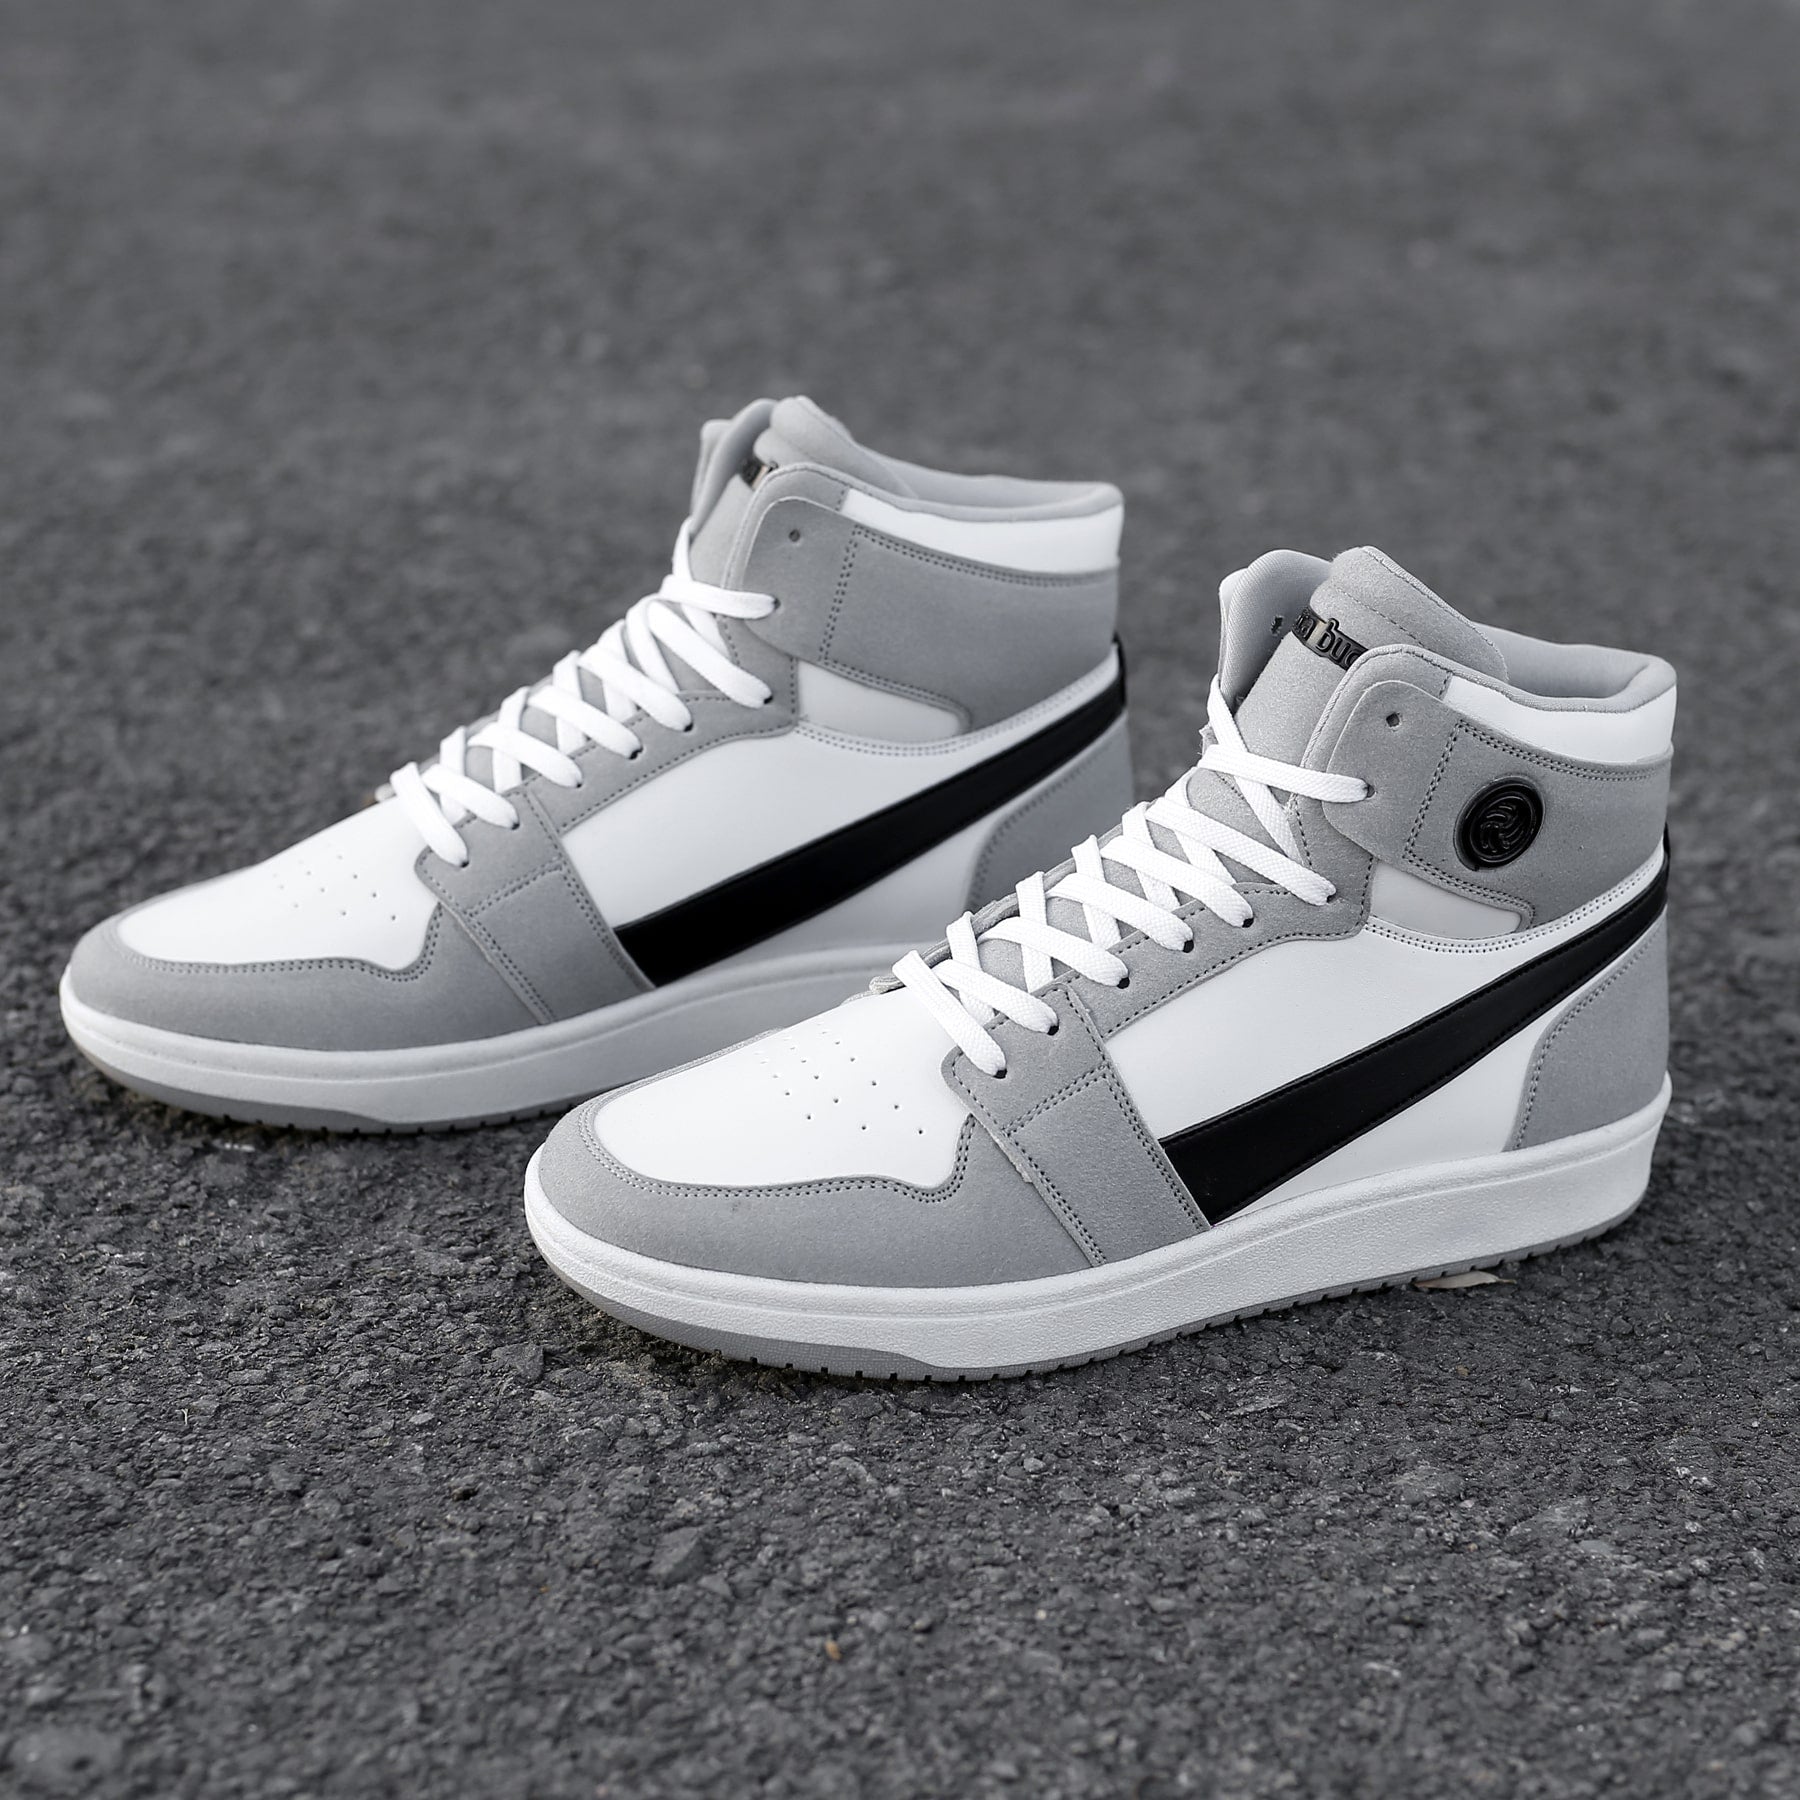 Sneakers for Men | White Sneakers for Men | Bacca Bucci